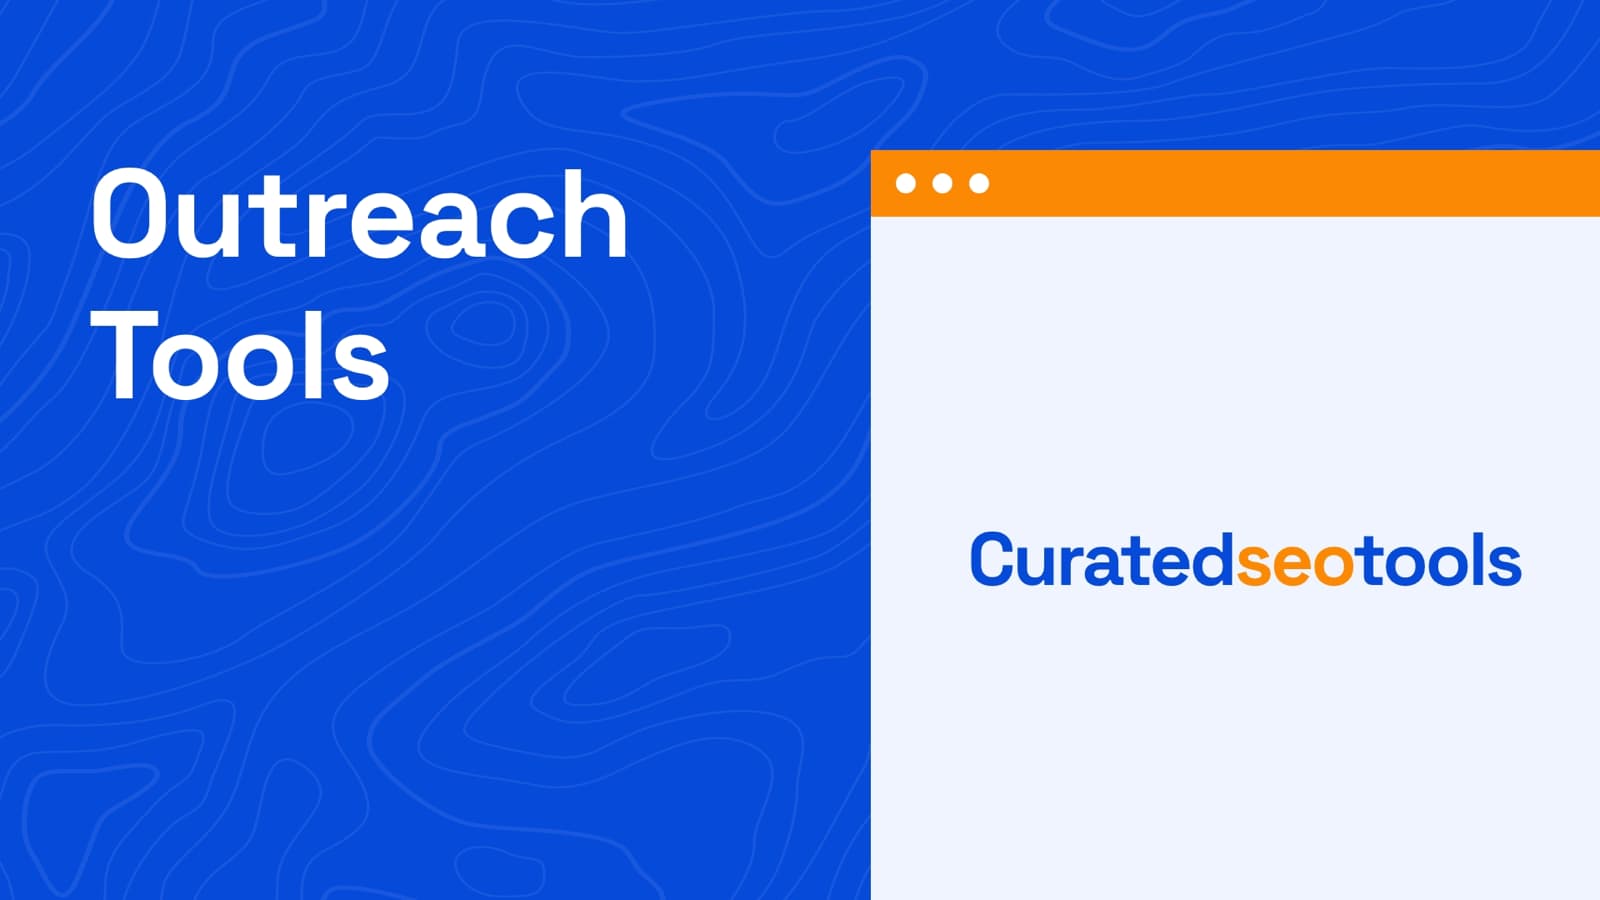 The cover image about the content title which is "Outreach Tools" and a browser shaped graphic element